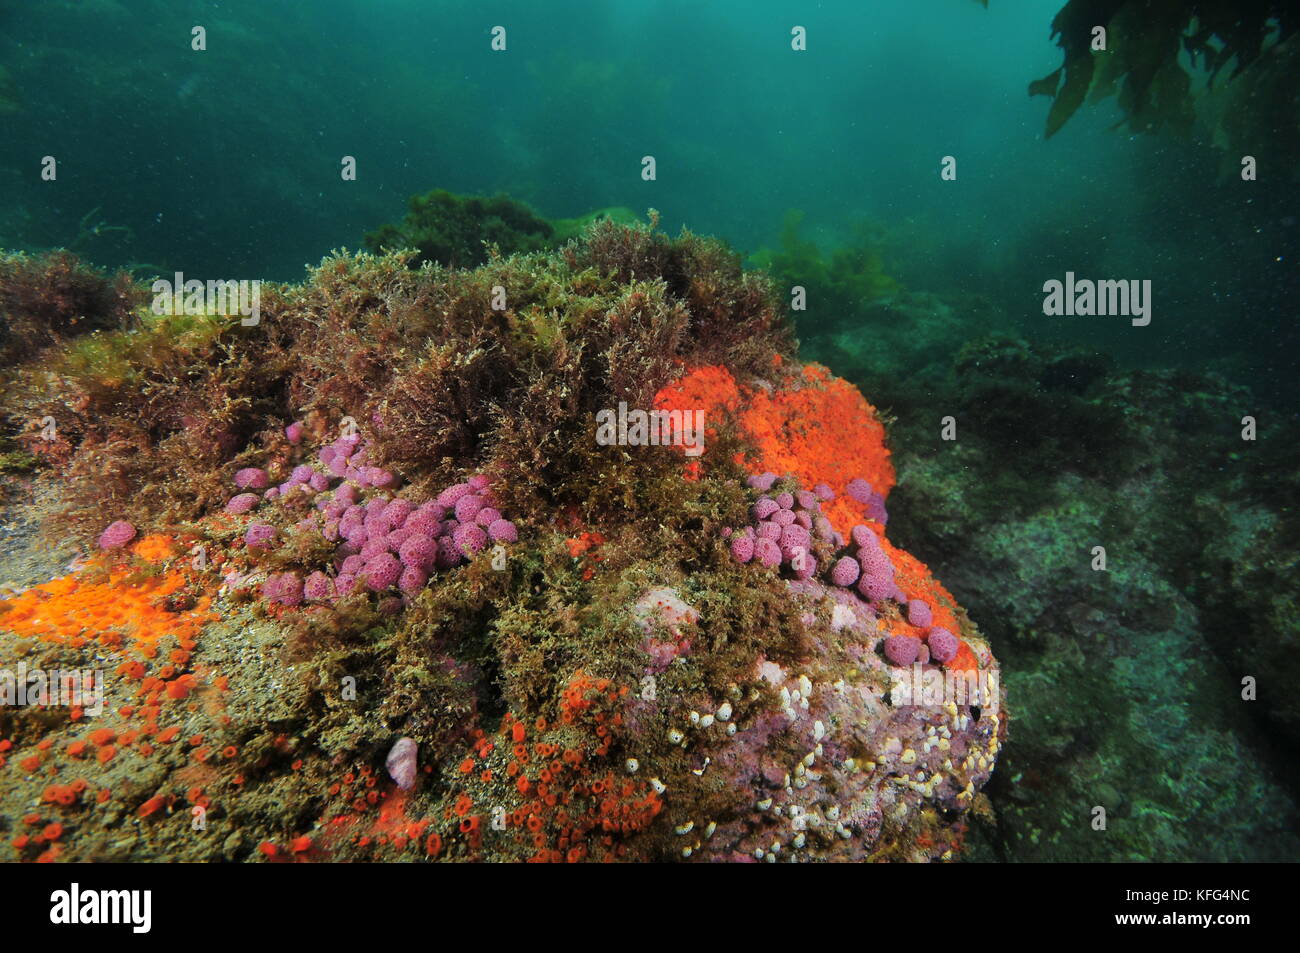 Rock covered with purple compound tunicates and red encrusting sponges in shade of overhang. Stock Photo